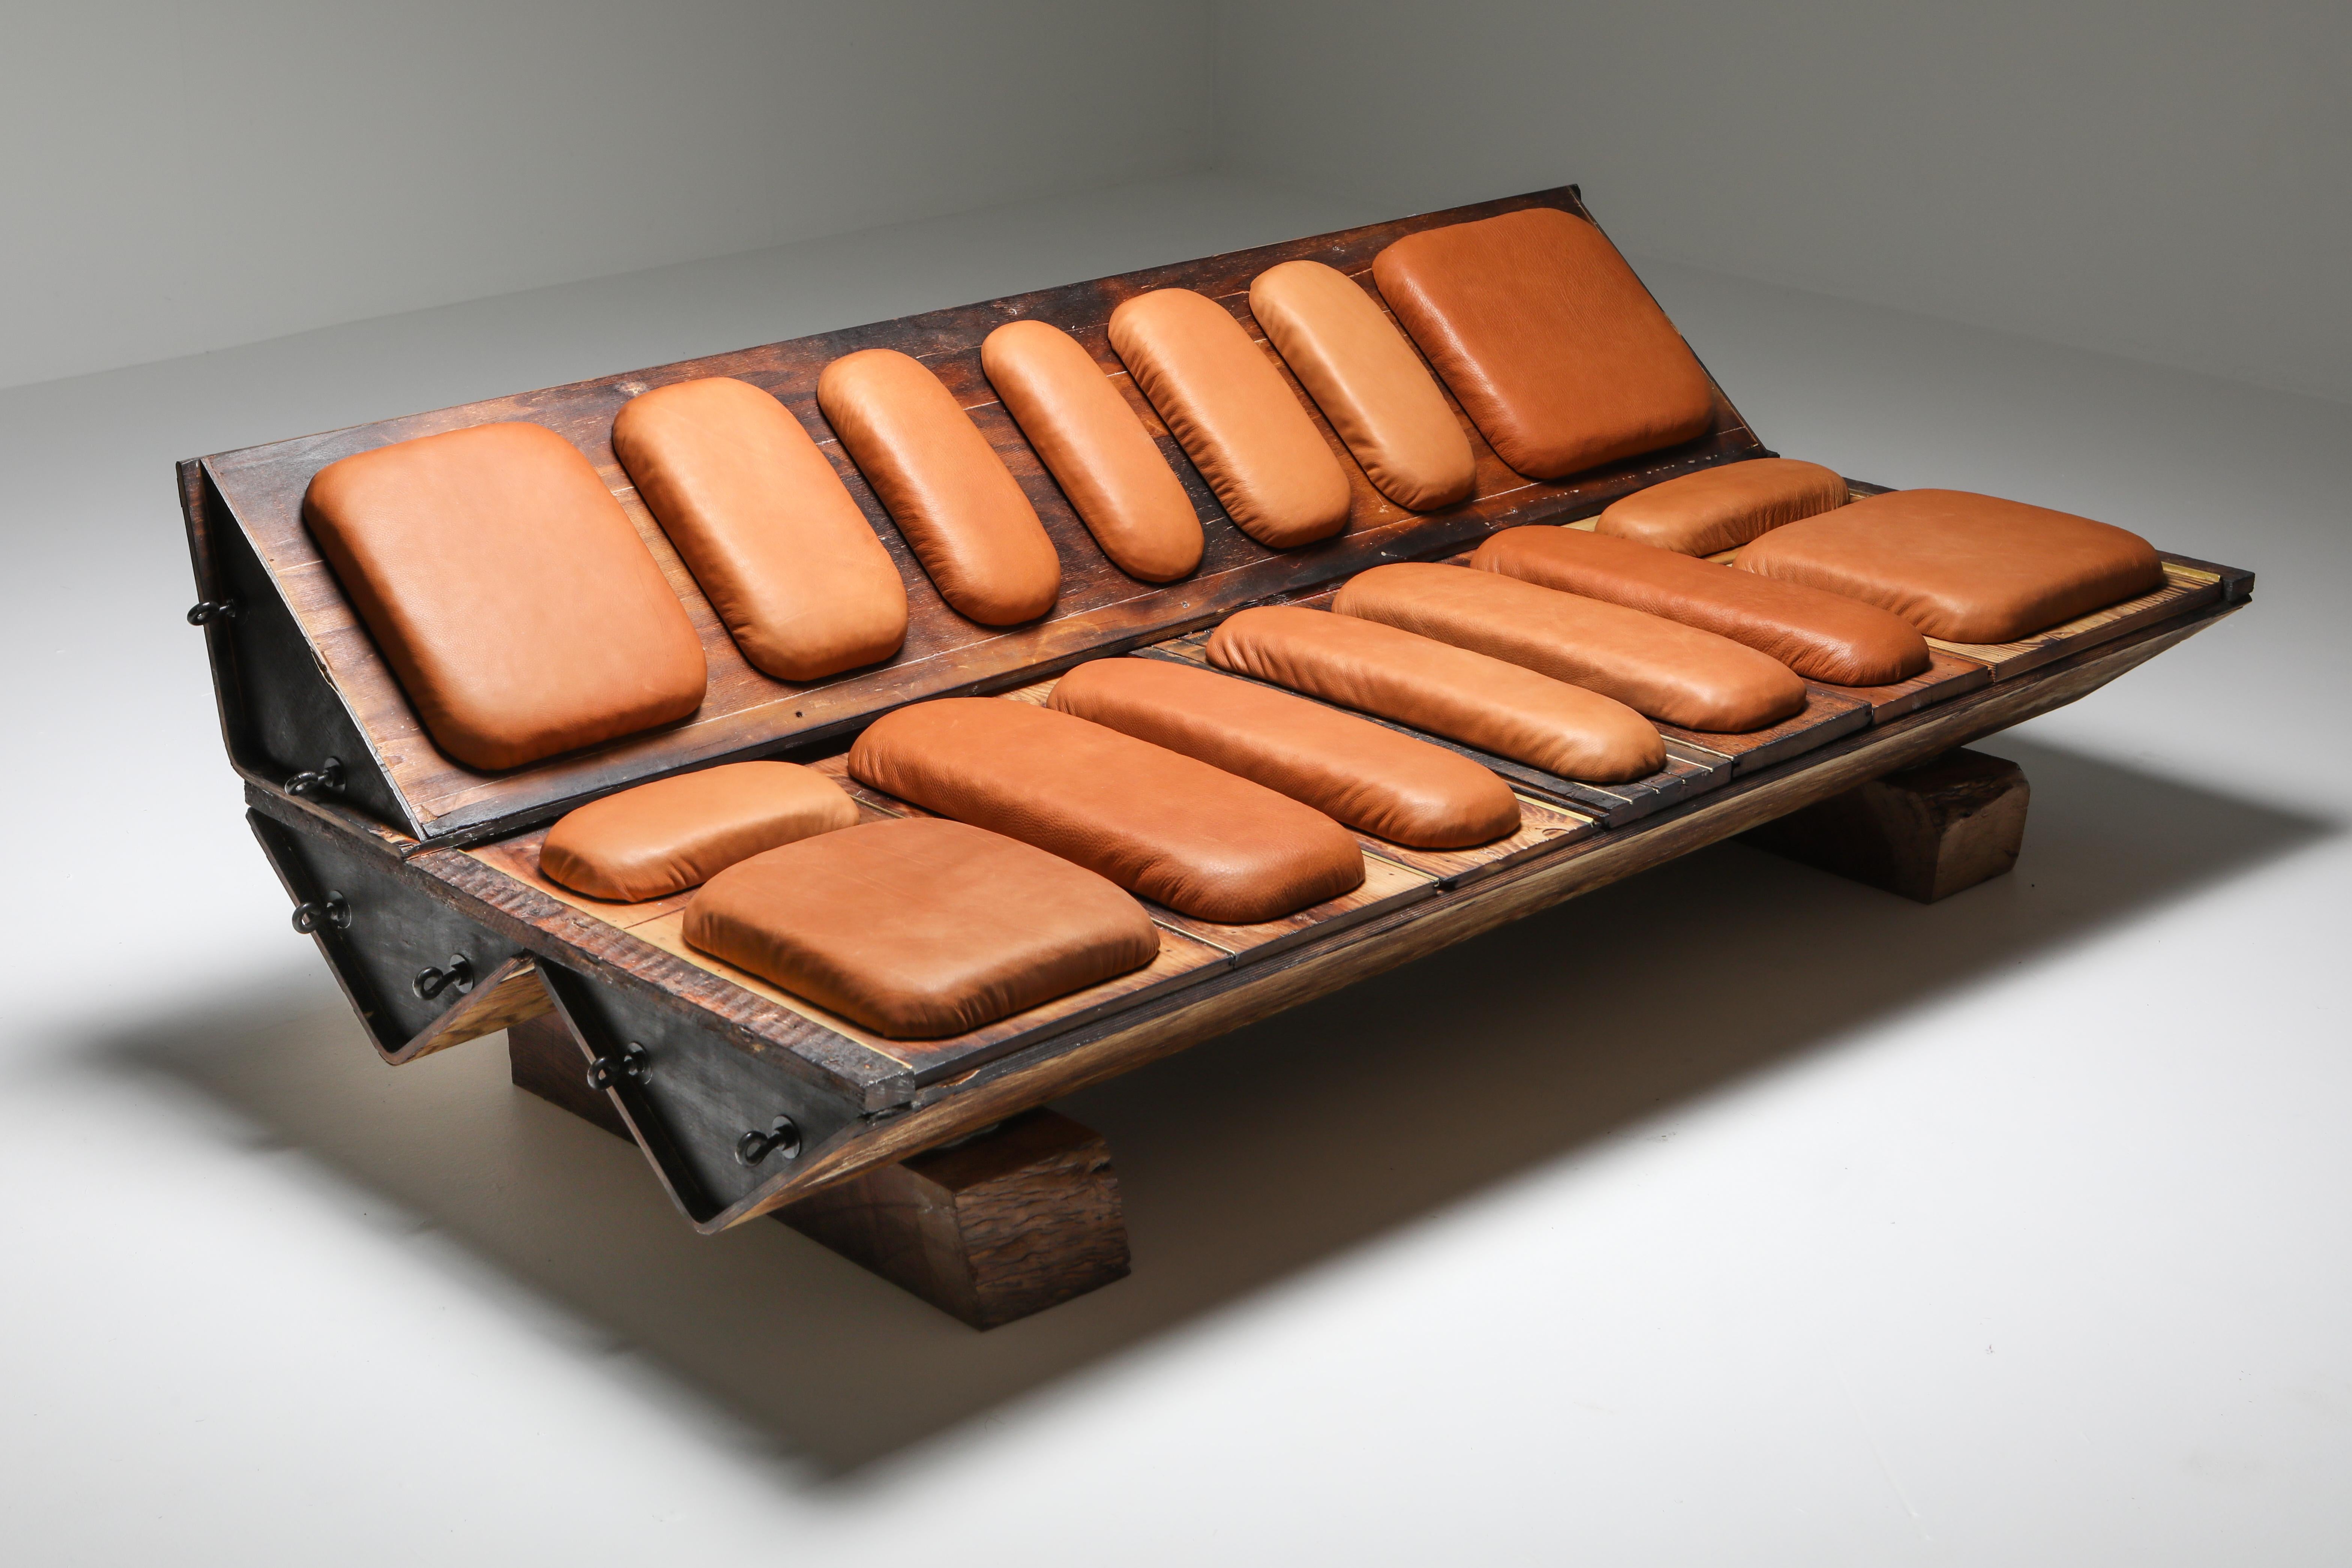 Belgian 'I Studebaker' Assemblage Bench with Wooden and Leather Elements, Lionel Jadot For Sale